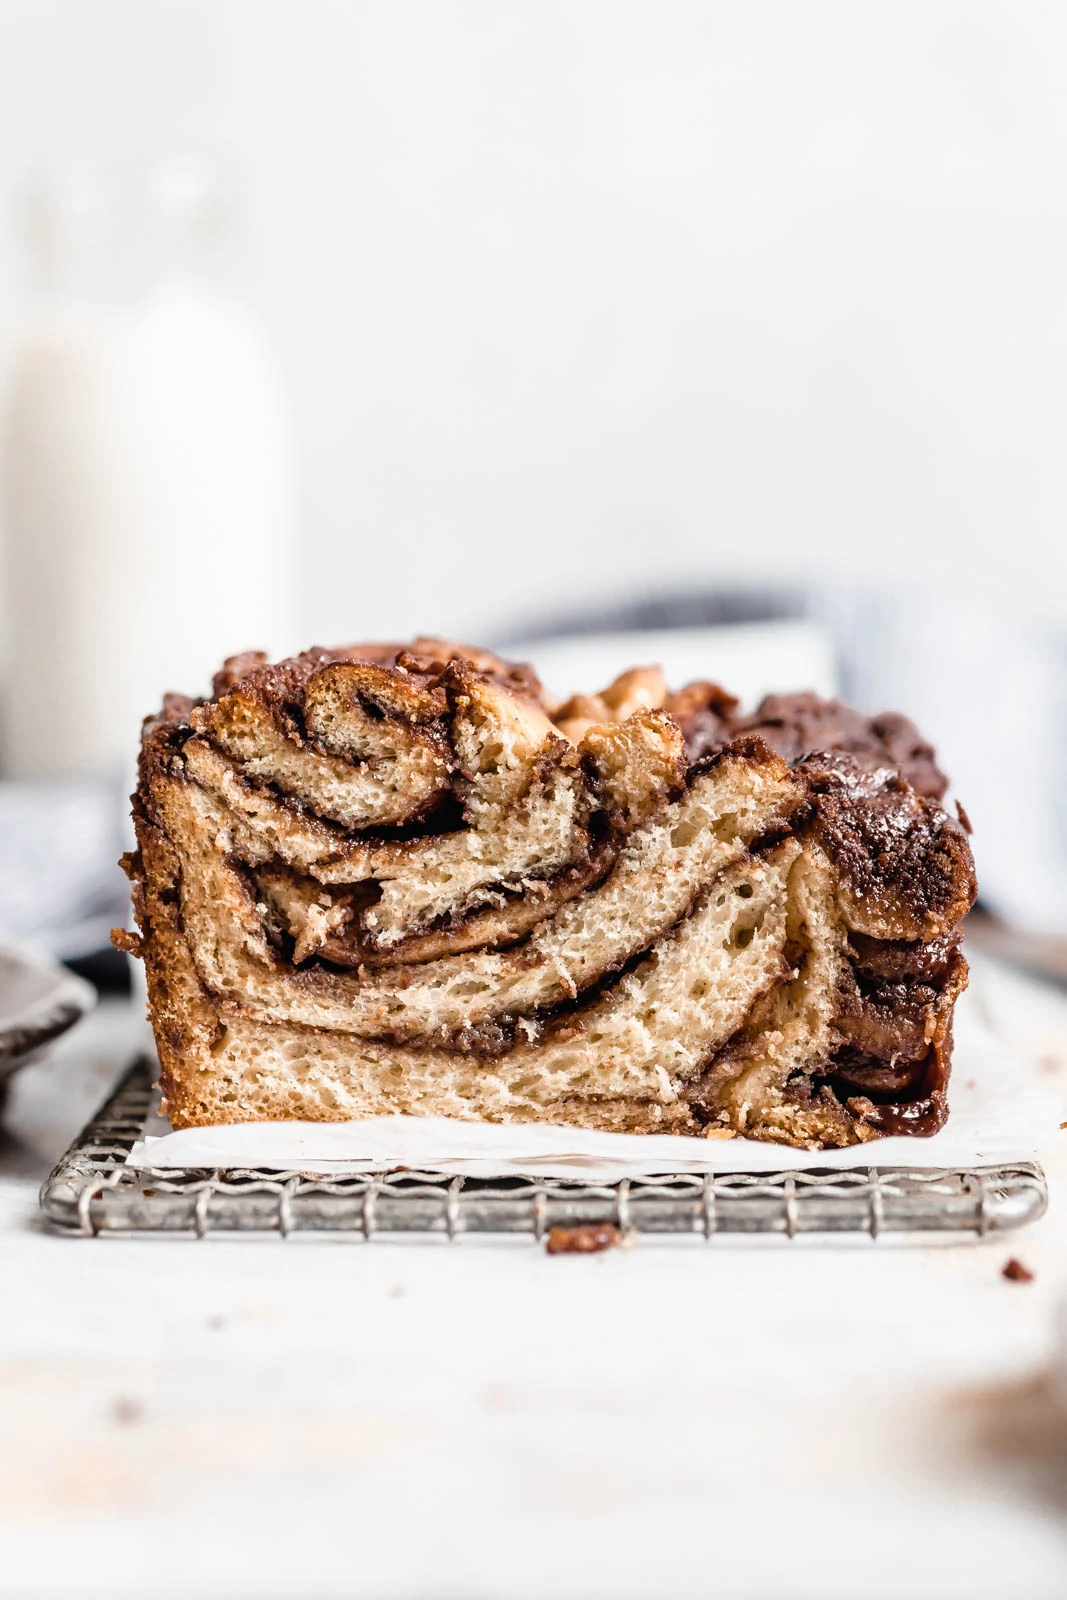 Buttery, flaky dough swirled together with cinnamon AND chocolate make this stunning Cinnamon Chocolate Babka. Step by step instructions on how to make the perfect babka!